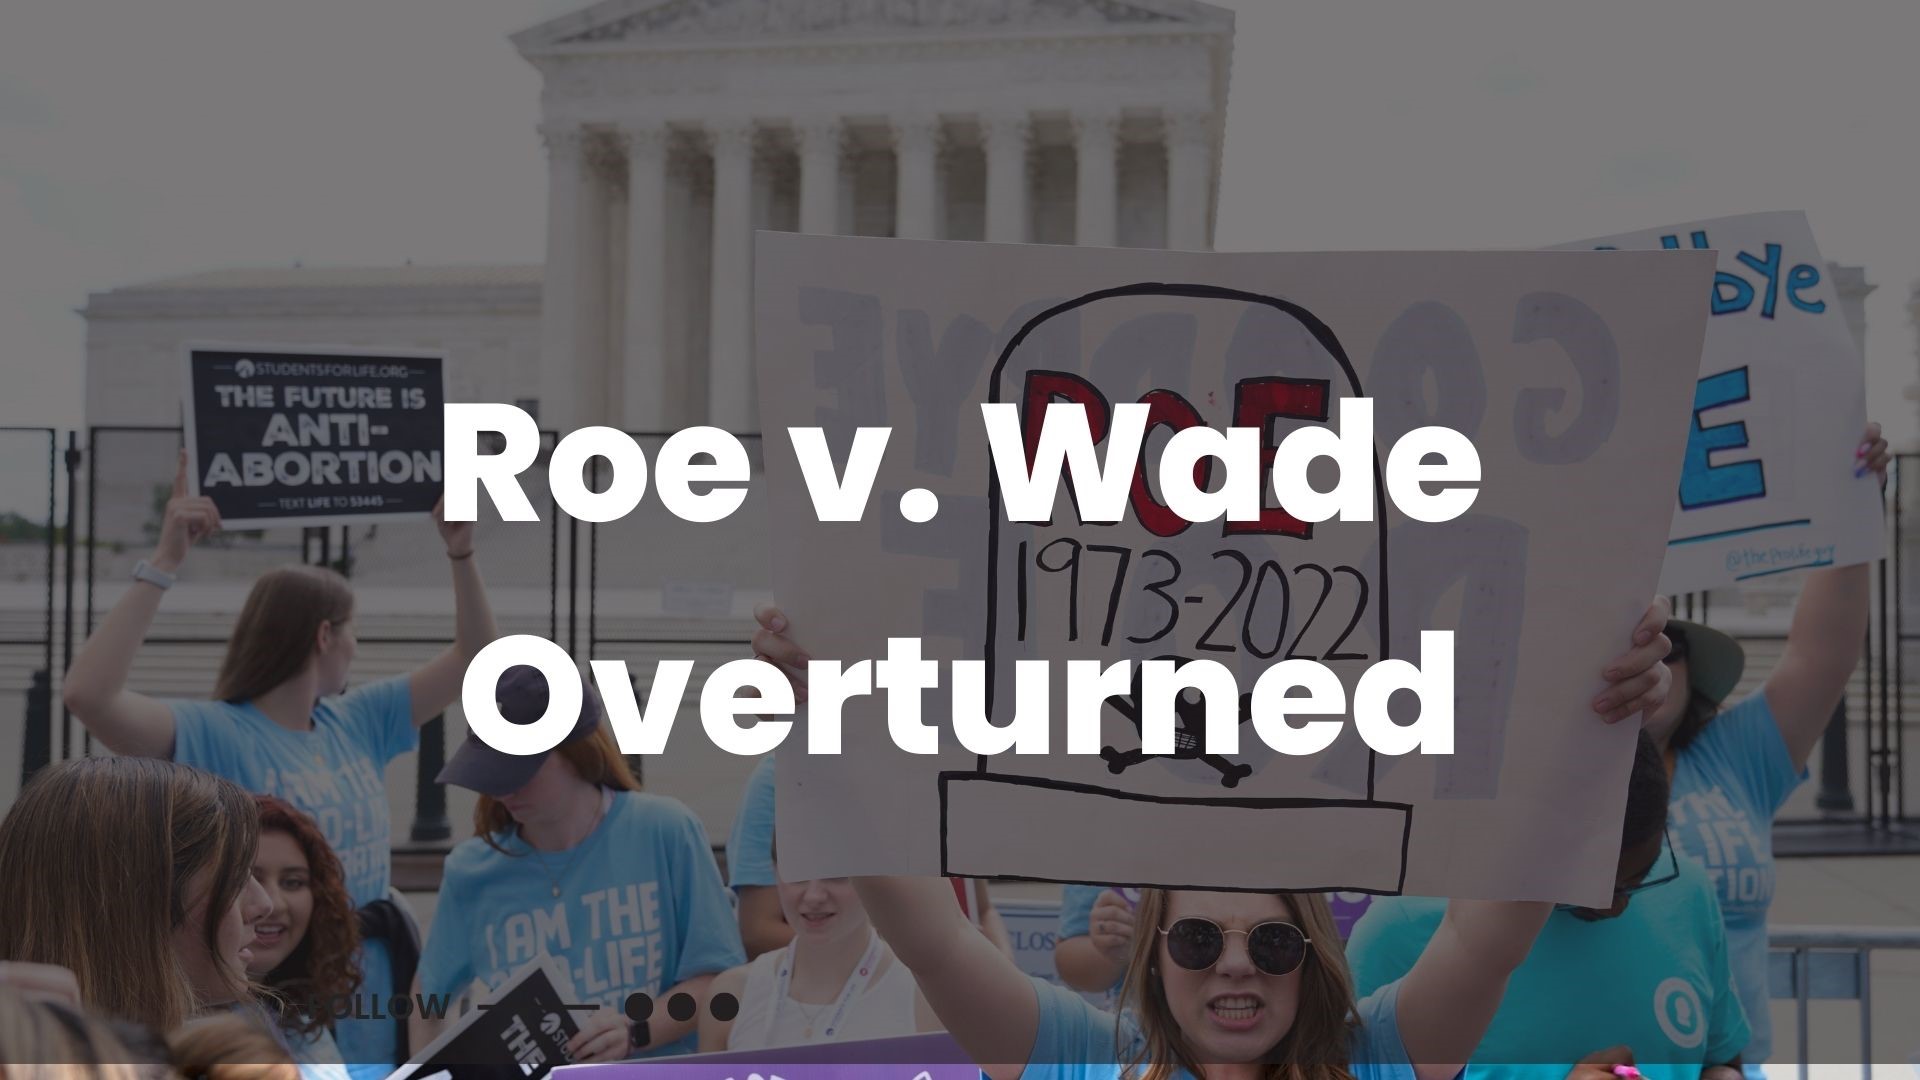 Explaining the Supreme Court ruling that overturns Roe v. Wade and the federal right to an abortion, as well as a timeline of the Roe v. Wade case.